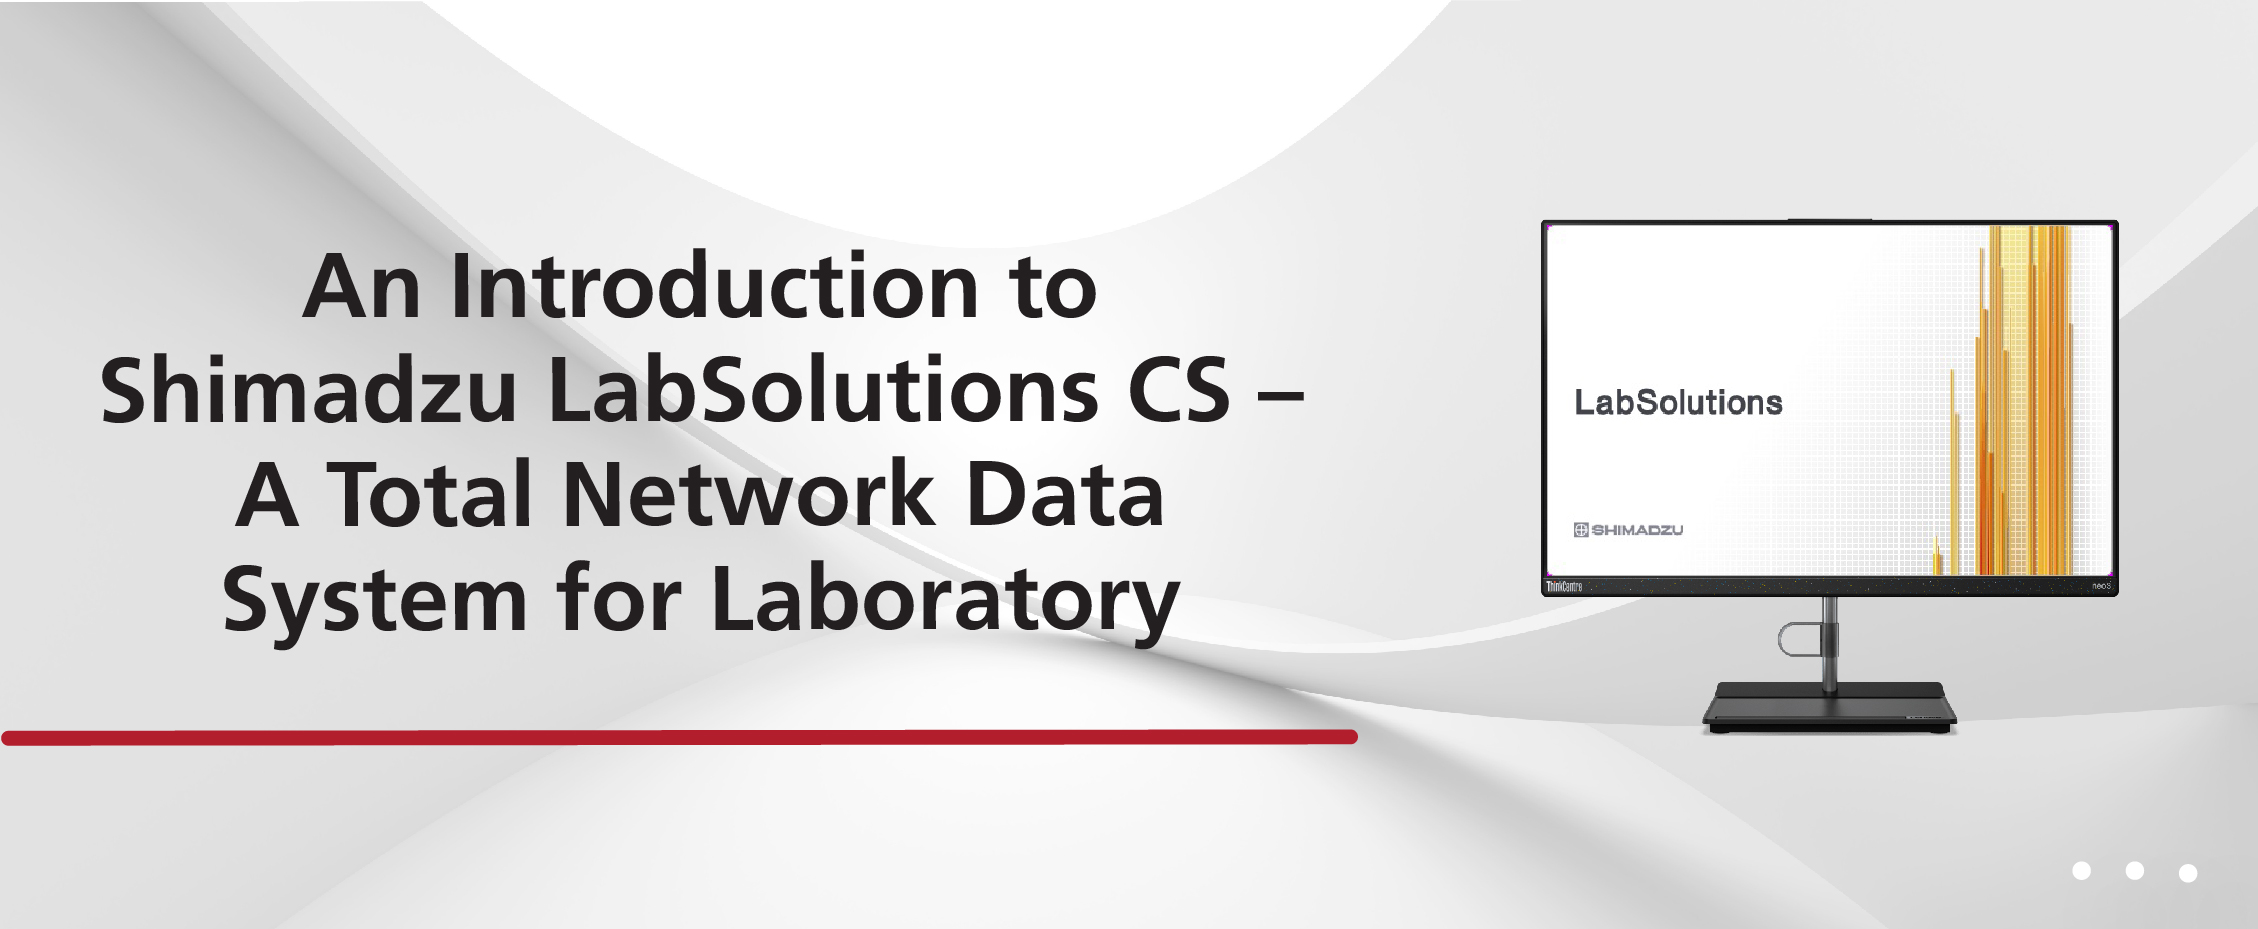 An Introduction to Shimadzu LabSolutions CS - A Total Network Data System for Laboratory